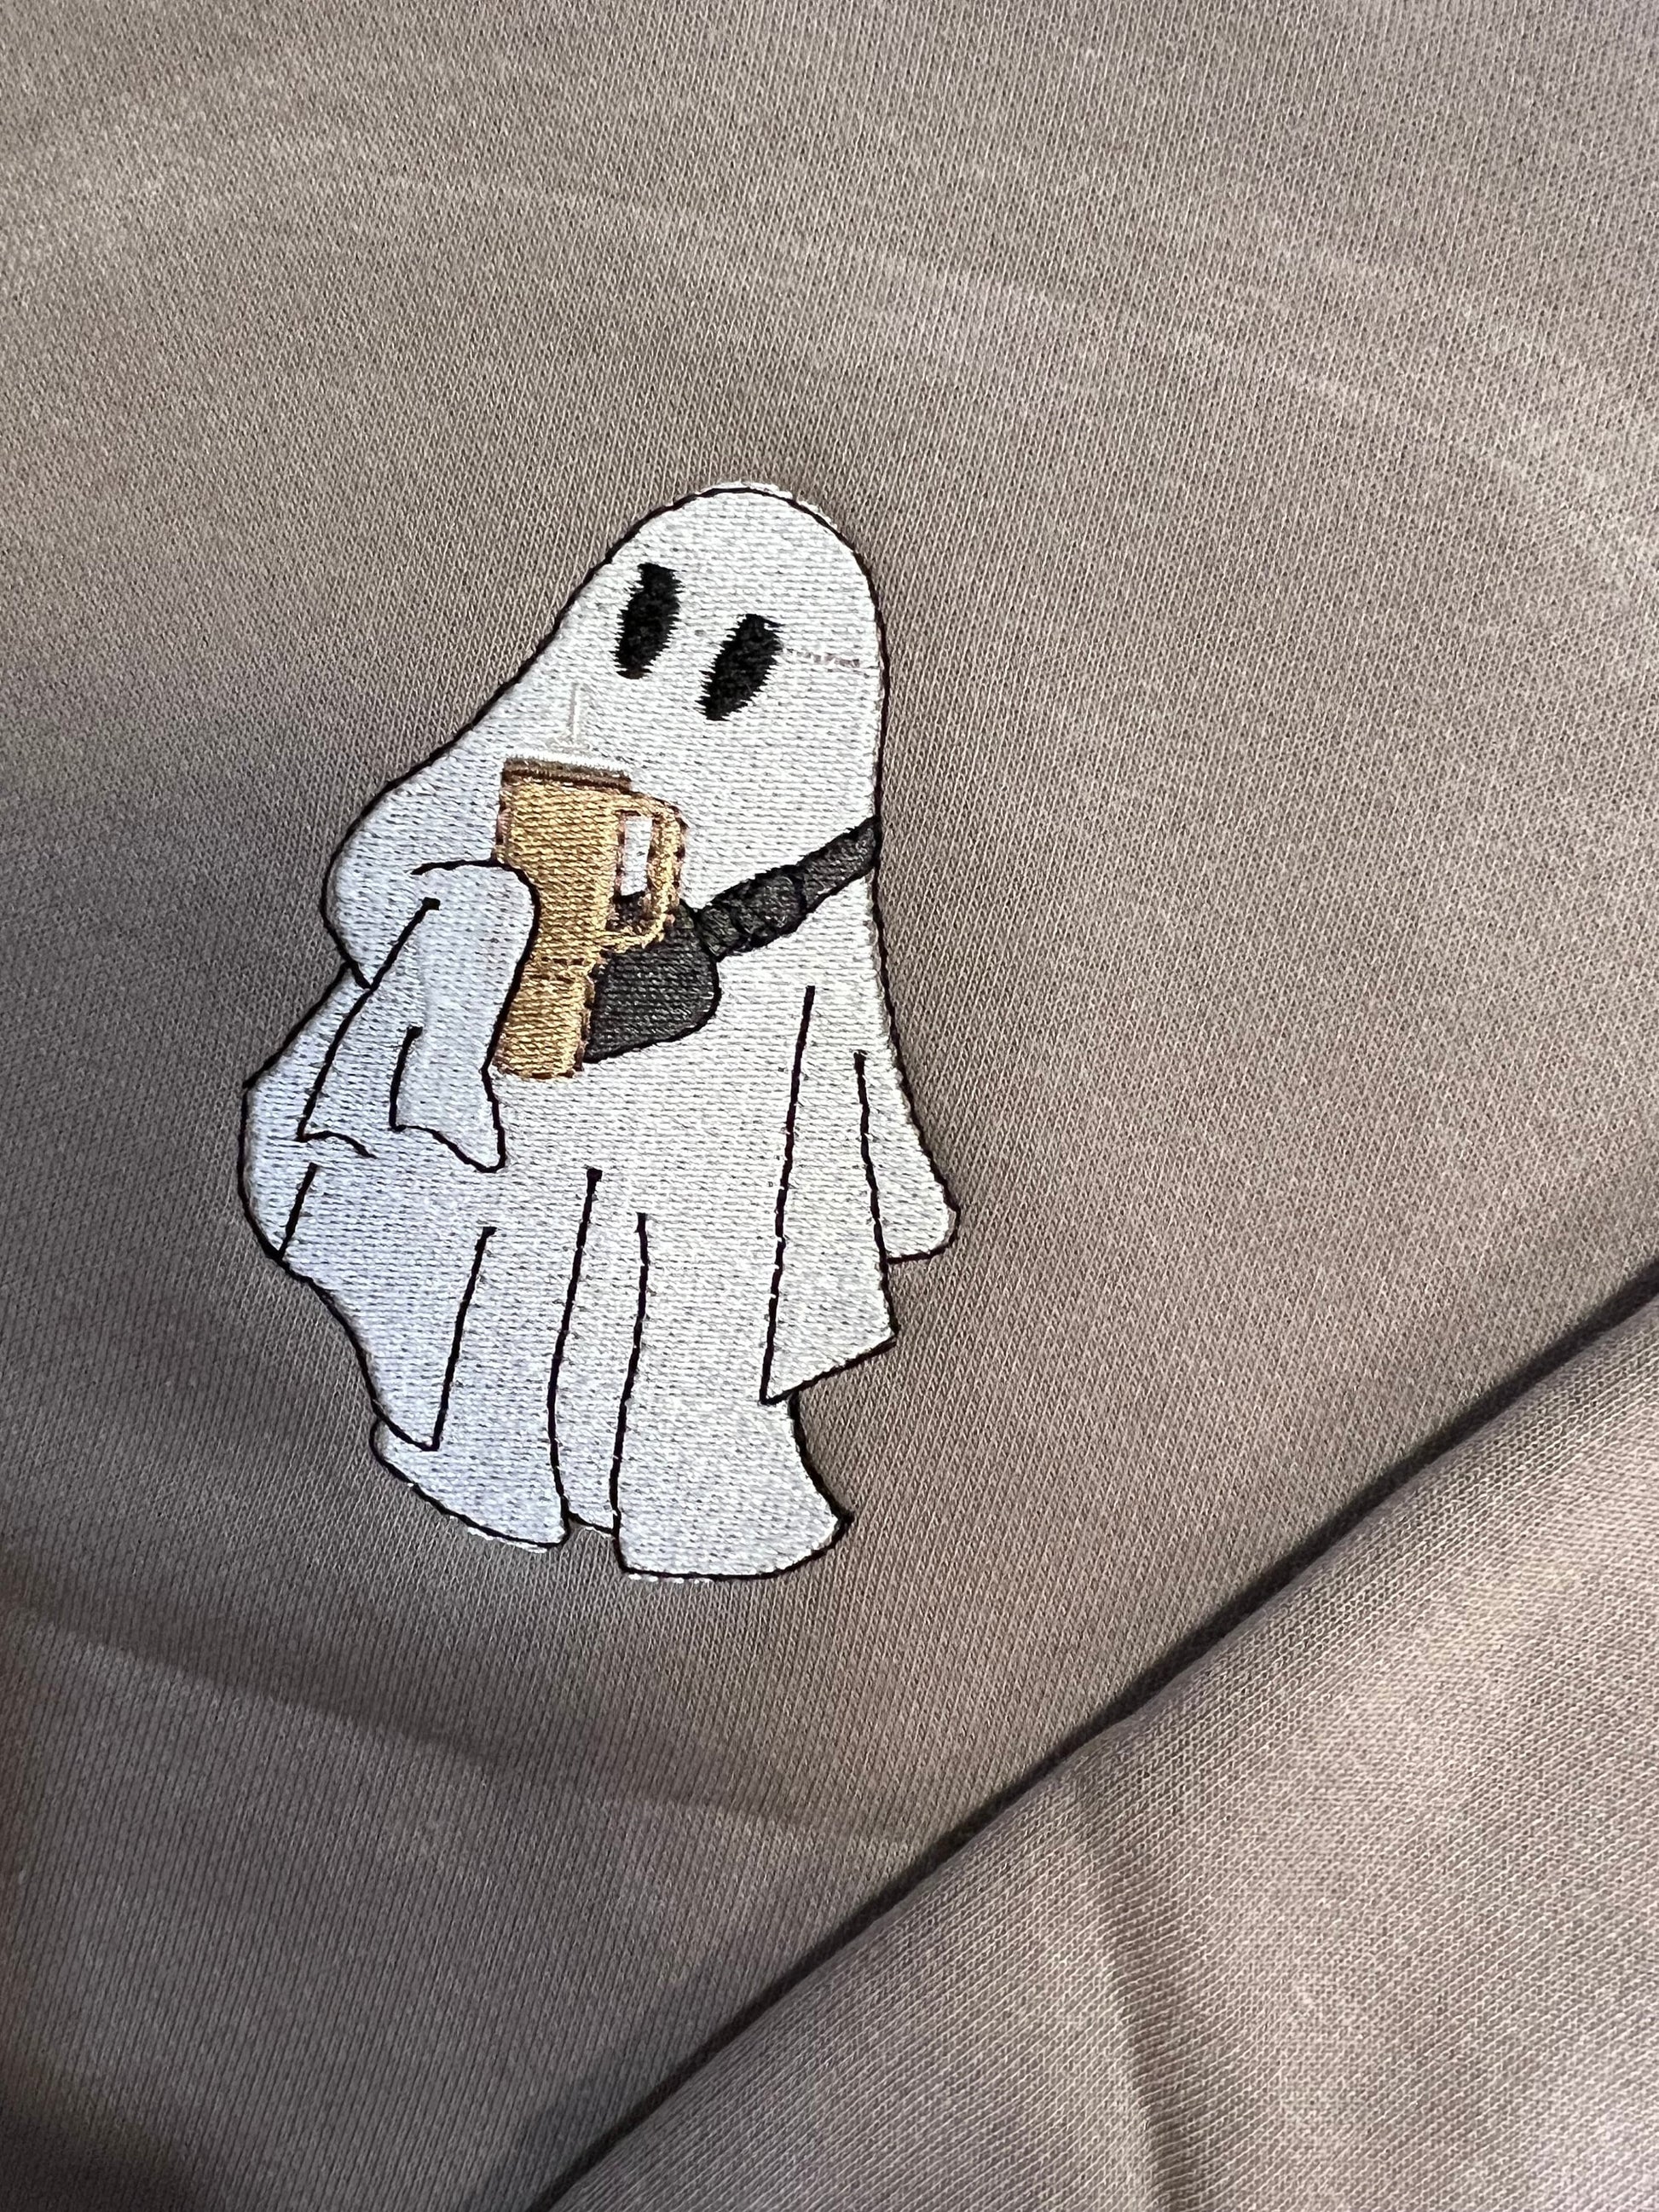 Halloween Sweatshirt Ghost Embroidered Shirt Spooky Gift For Friend Halloween Crewneck Ghosts Cute Halloween Funny Ghost